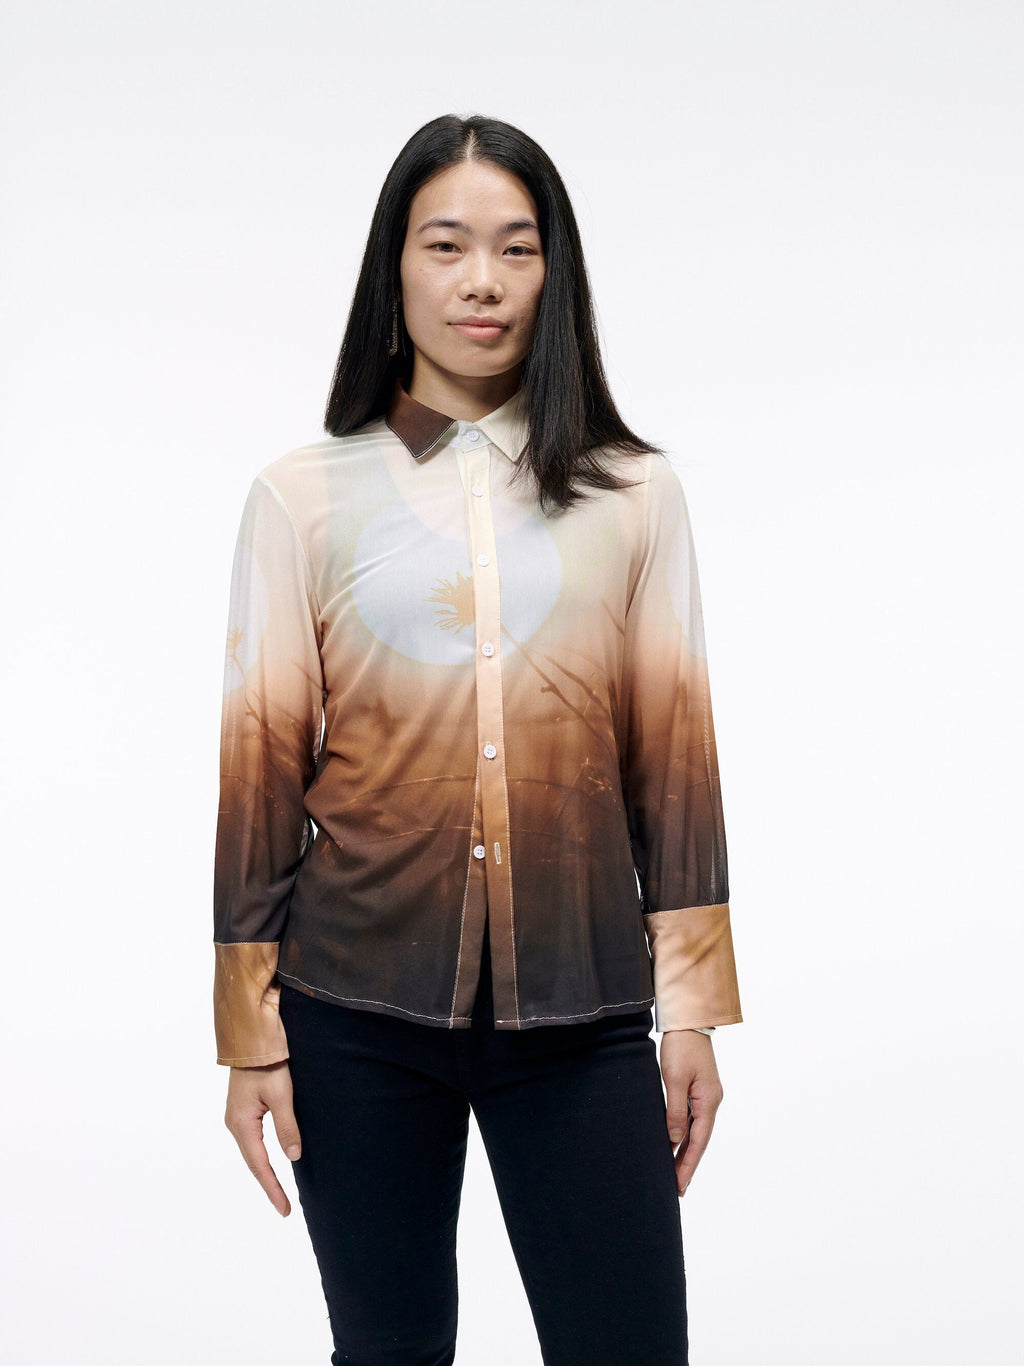 The Blazing Meadow Sun Scream Top | A Glorious Piece for the 70s Obsessed | Sheer Mesh Shirt with Photographic Print | Goose Taffy